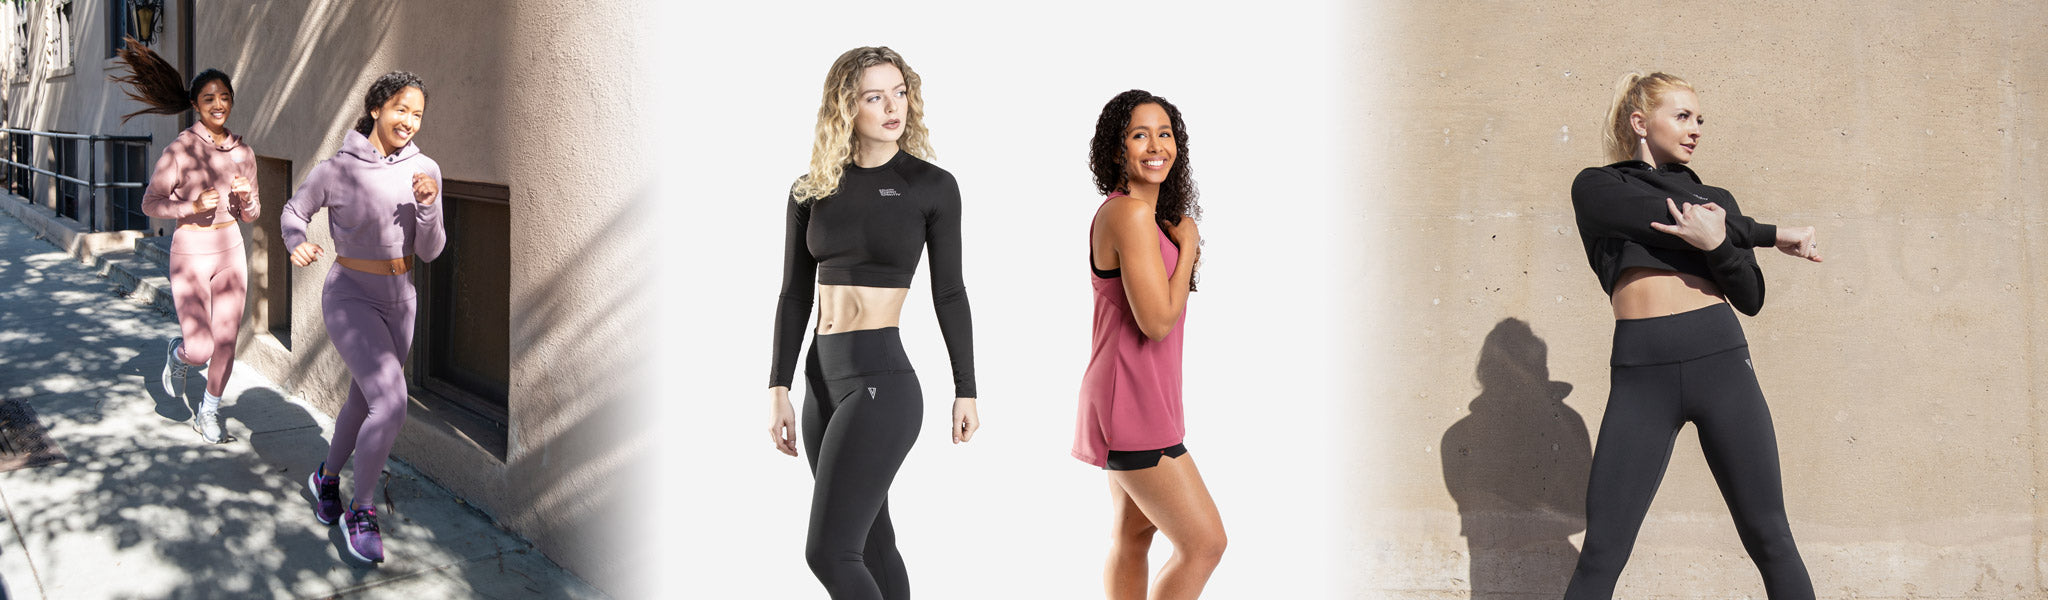 Nonzero Gravity ZinTex Apparel for Women - Antimicrobial protection from a natural source